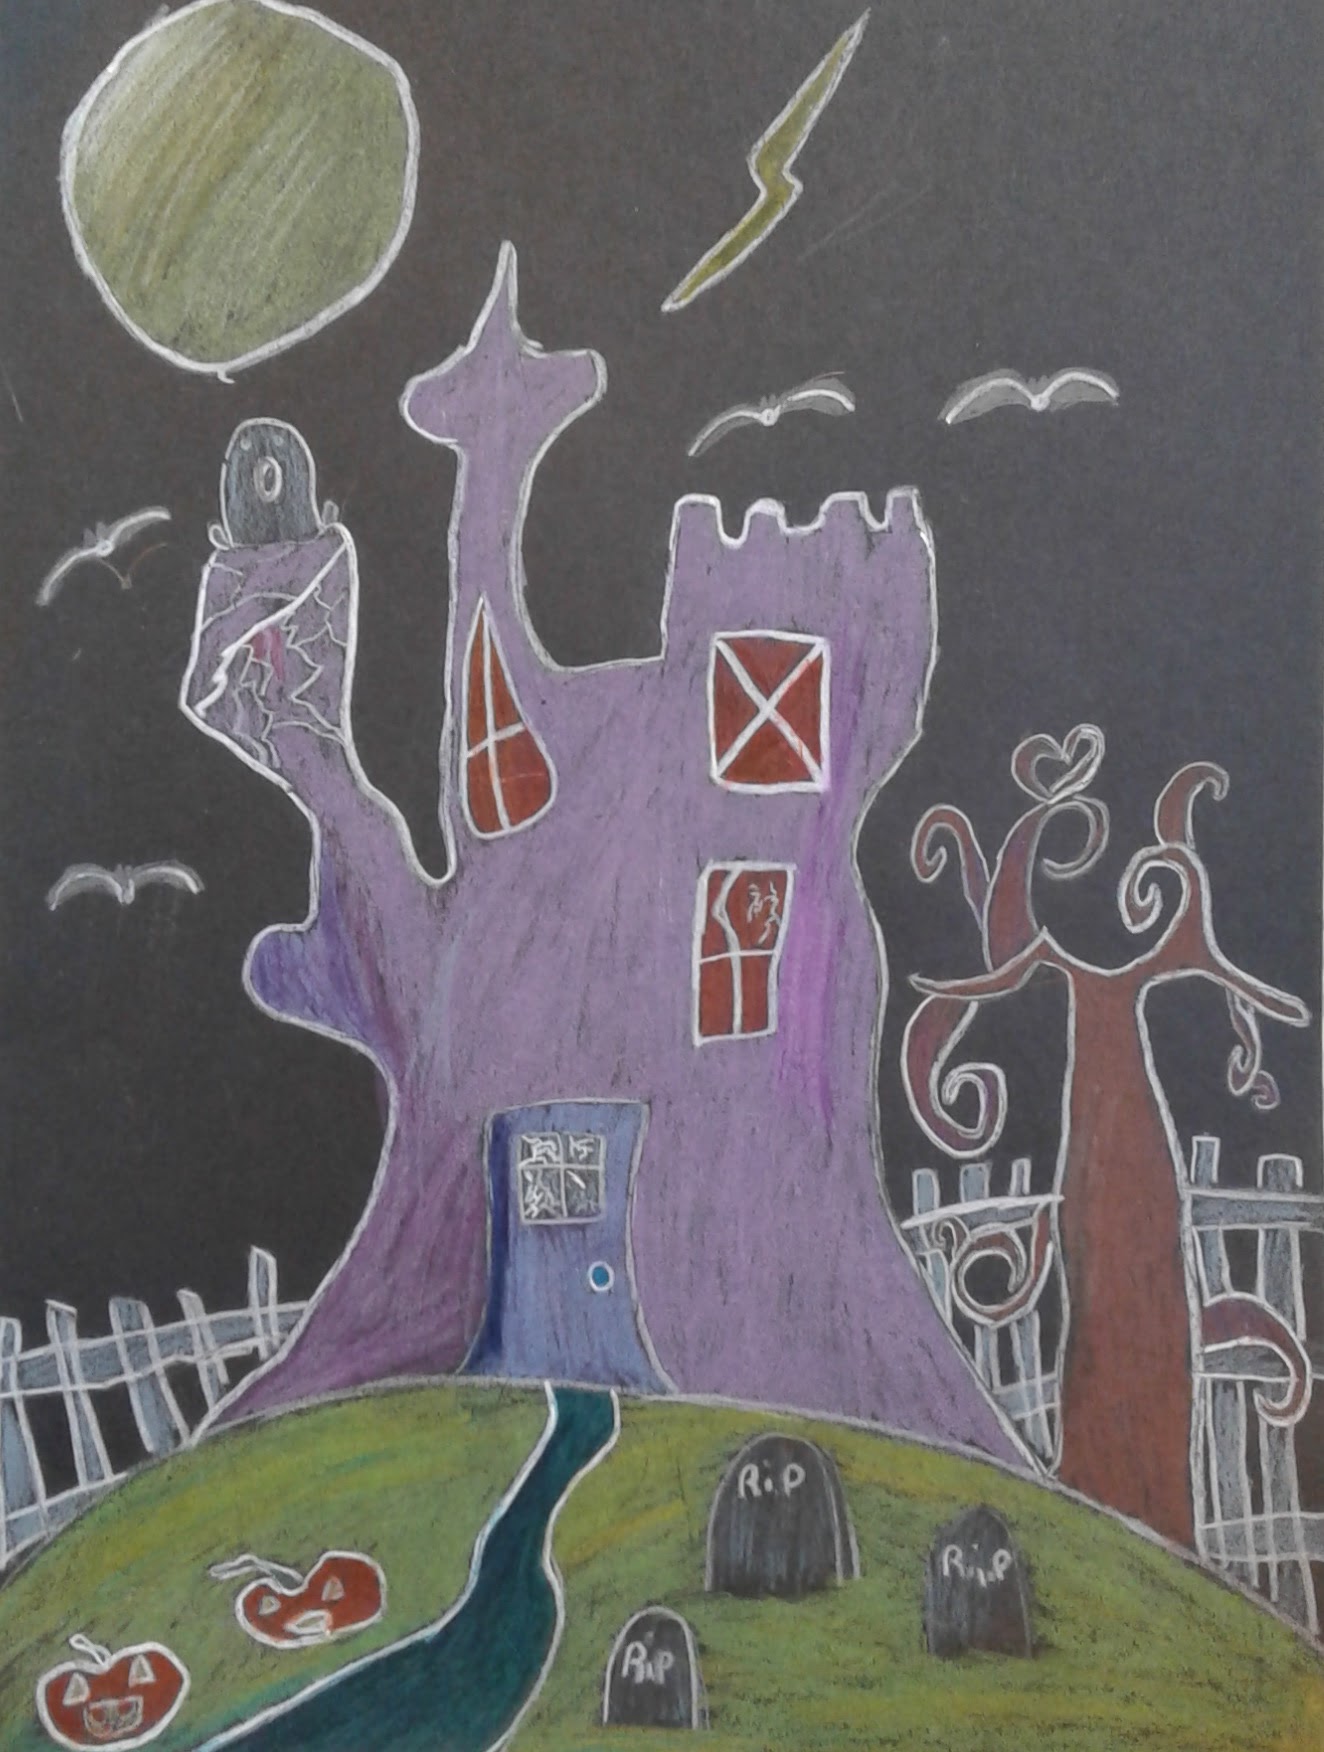 Haunted house design, White pen on black paper, louisaclare10